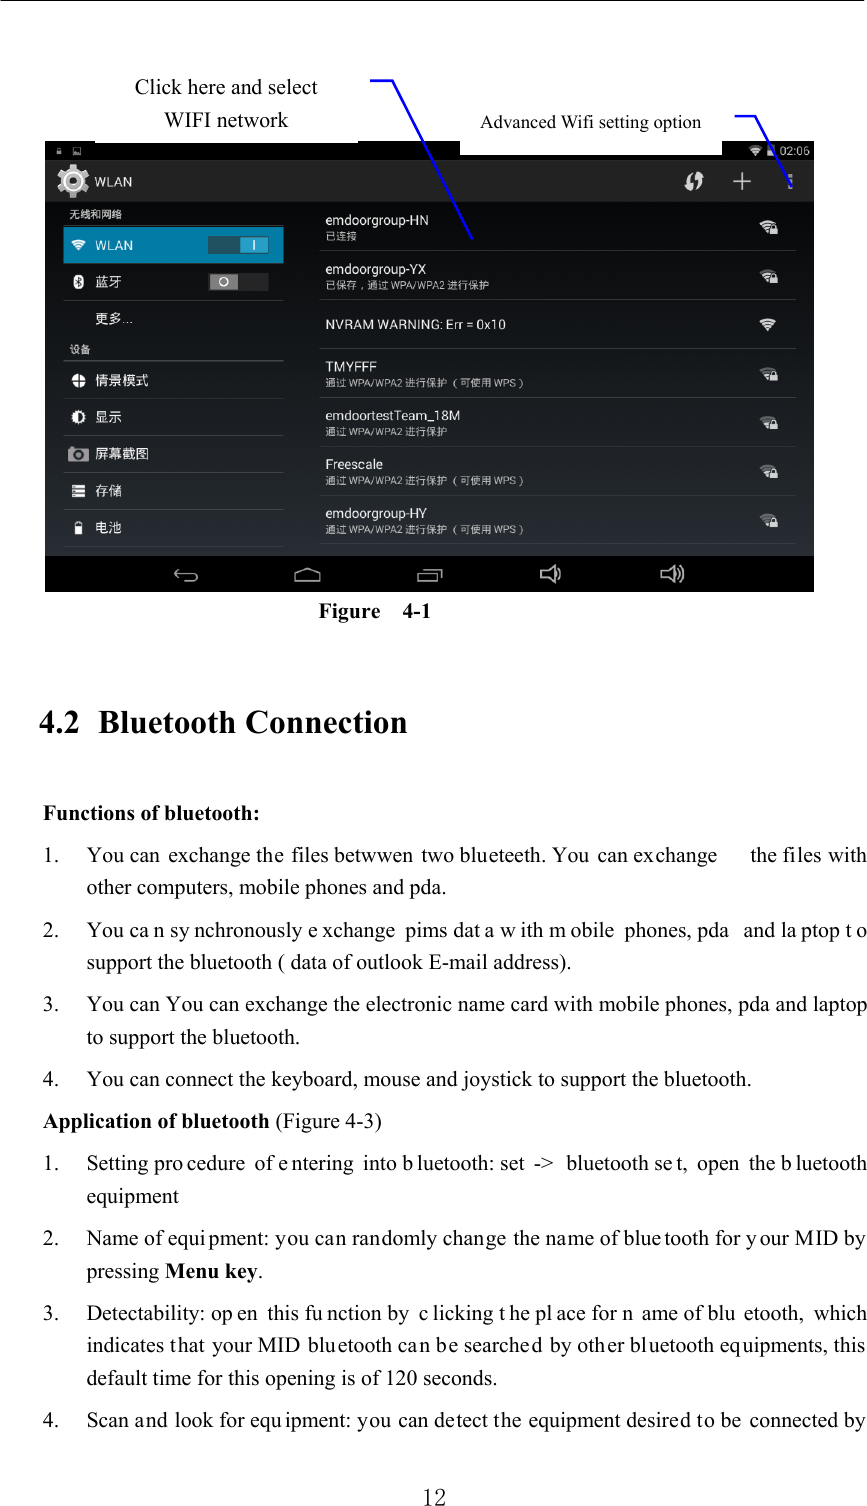          12     Figure   4-1 4.2 Bluetooth Connection   Functions of bluetooth: 1. You can exchange the files betwwen two blueteeth. You can exchange      the files with other computers, mobile phones and pda.   2. You ca n sy nchronously e xchange pims dat a w ith m obile phones, pda  and la ptop t o support the bluetooth ( data of outlook E-mail address). 3. You can You can exchange the electronic name card with mobile phones, pda and laptop to support the bluetooth. 4. You can connect the keyboard, mouse and joystick to support the bluetooth. Application of bluetooth (Figure 4-3) 1. Setting pro cedure of e ntering into b luetooth: set  -&gt;  bluetooth se t, open the b luetooth equipment  2. Name of equi pment: you can randomly change the name of blue tooth for your MID by pressing Menu key.  3. Detectability: op en this fu nction by  c licking t he pl ace for n ame of blu etooth, which indicates that your MID bluetooth can be searched by other bluetooth equipments, this default time for this opening is of 120 seconds.   4. Scan and look for equ ipment: you can detect the equipment desired to be connected by Advanced Wifi setting option Click here and select WIFI network 